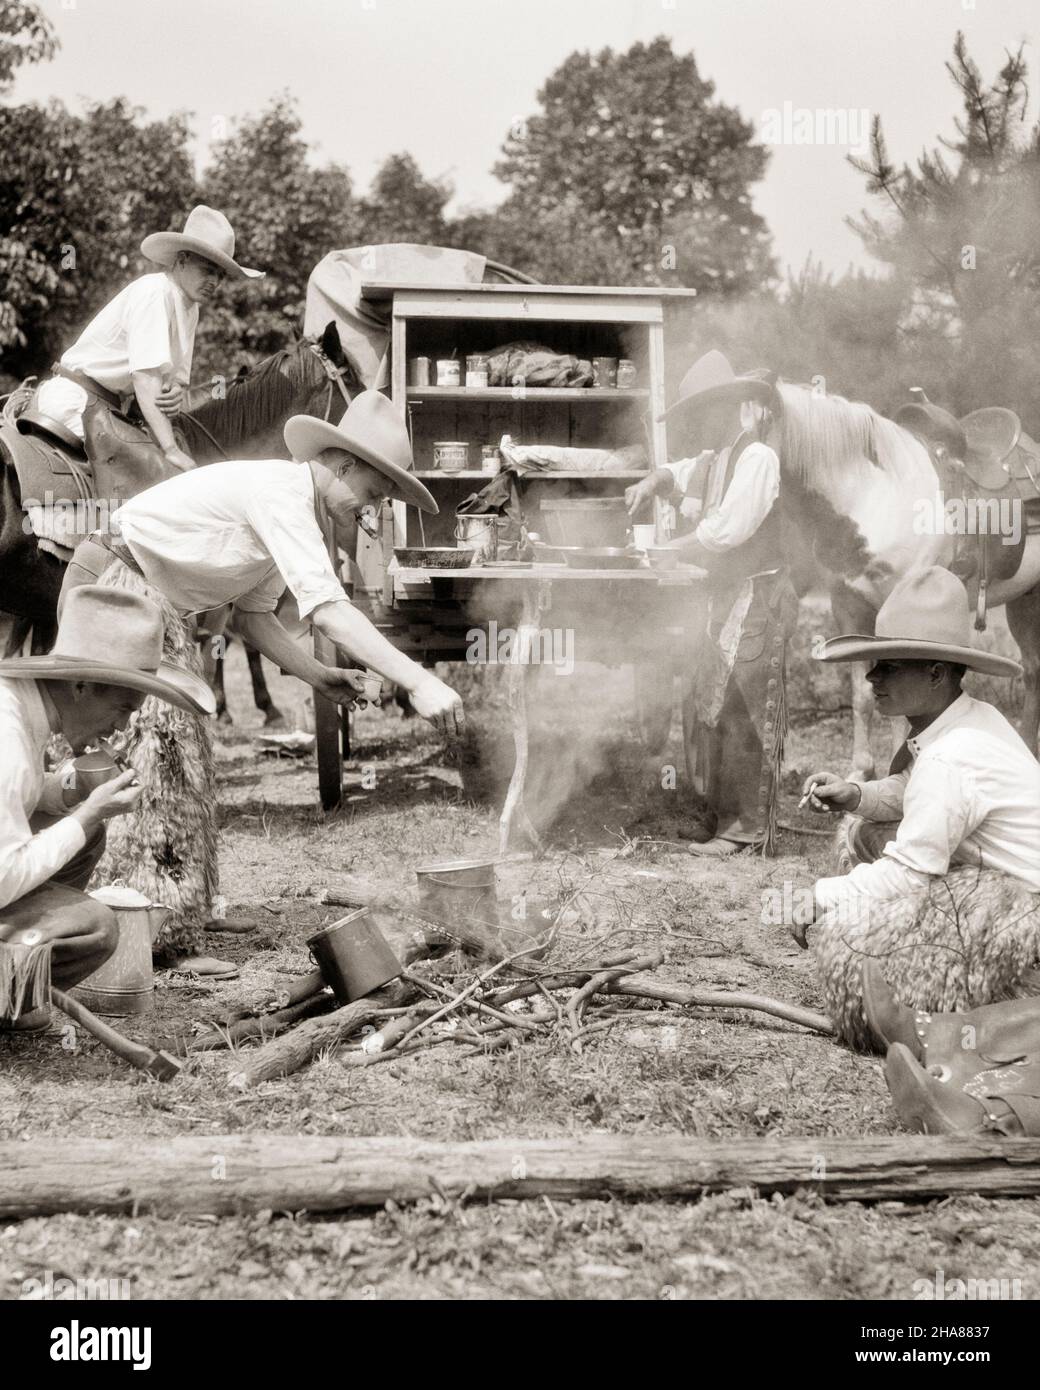 1930s WESTERN MEN RANCH HAND COWBOYS COOKING AND EATING GATHERED AROUND CAMPFIRE BESIDE A CHUCK WAGON ALL WEARING 10 GALLON HATS - h1161 HAR001 HARS COPY SPACE FRIENDSHIP FULL-LENGTH PERSONS CHARACTER MALES WESTERN ALL BEANS CAMPFIRE B&W COWBOYS MAMMALS ADVENTURE LEISURE AND NUTRITION RECREATION A OCCUPATIONS GALLON CONCEPTUAL 10 BESIDE CONSUME CONSUMING NOURISHMENT RANCH HAND GATHERED MAMMAL MID-ADULT MID-ADULT MAN RELAXATION TOGETHERNESS YOUNG ADULT MAN BLACK AND WHITE HAR001 OLD FASHIONED Stock Photo